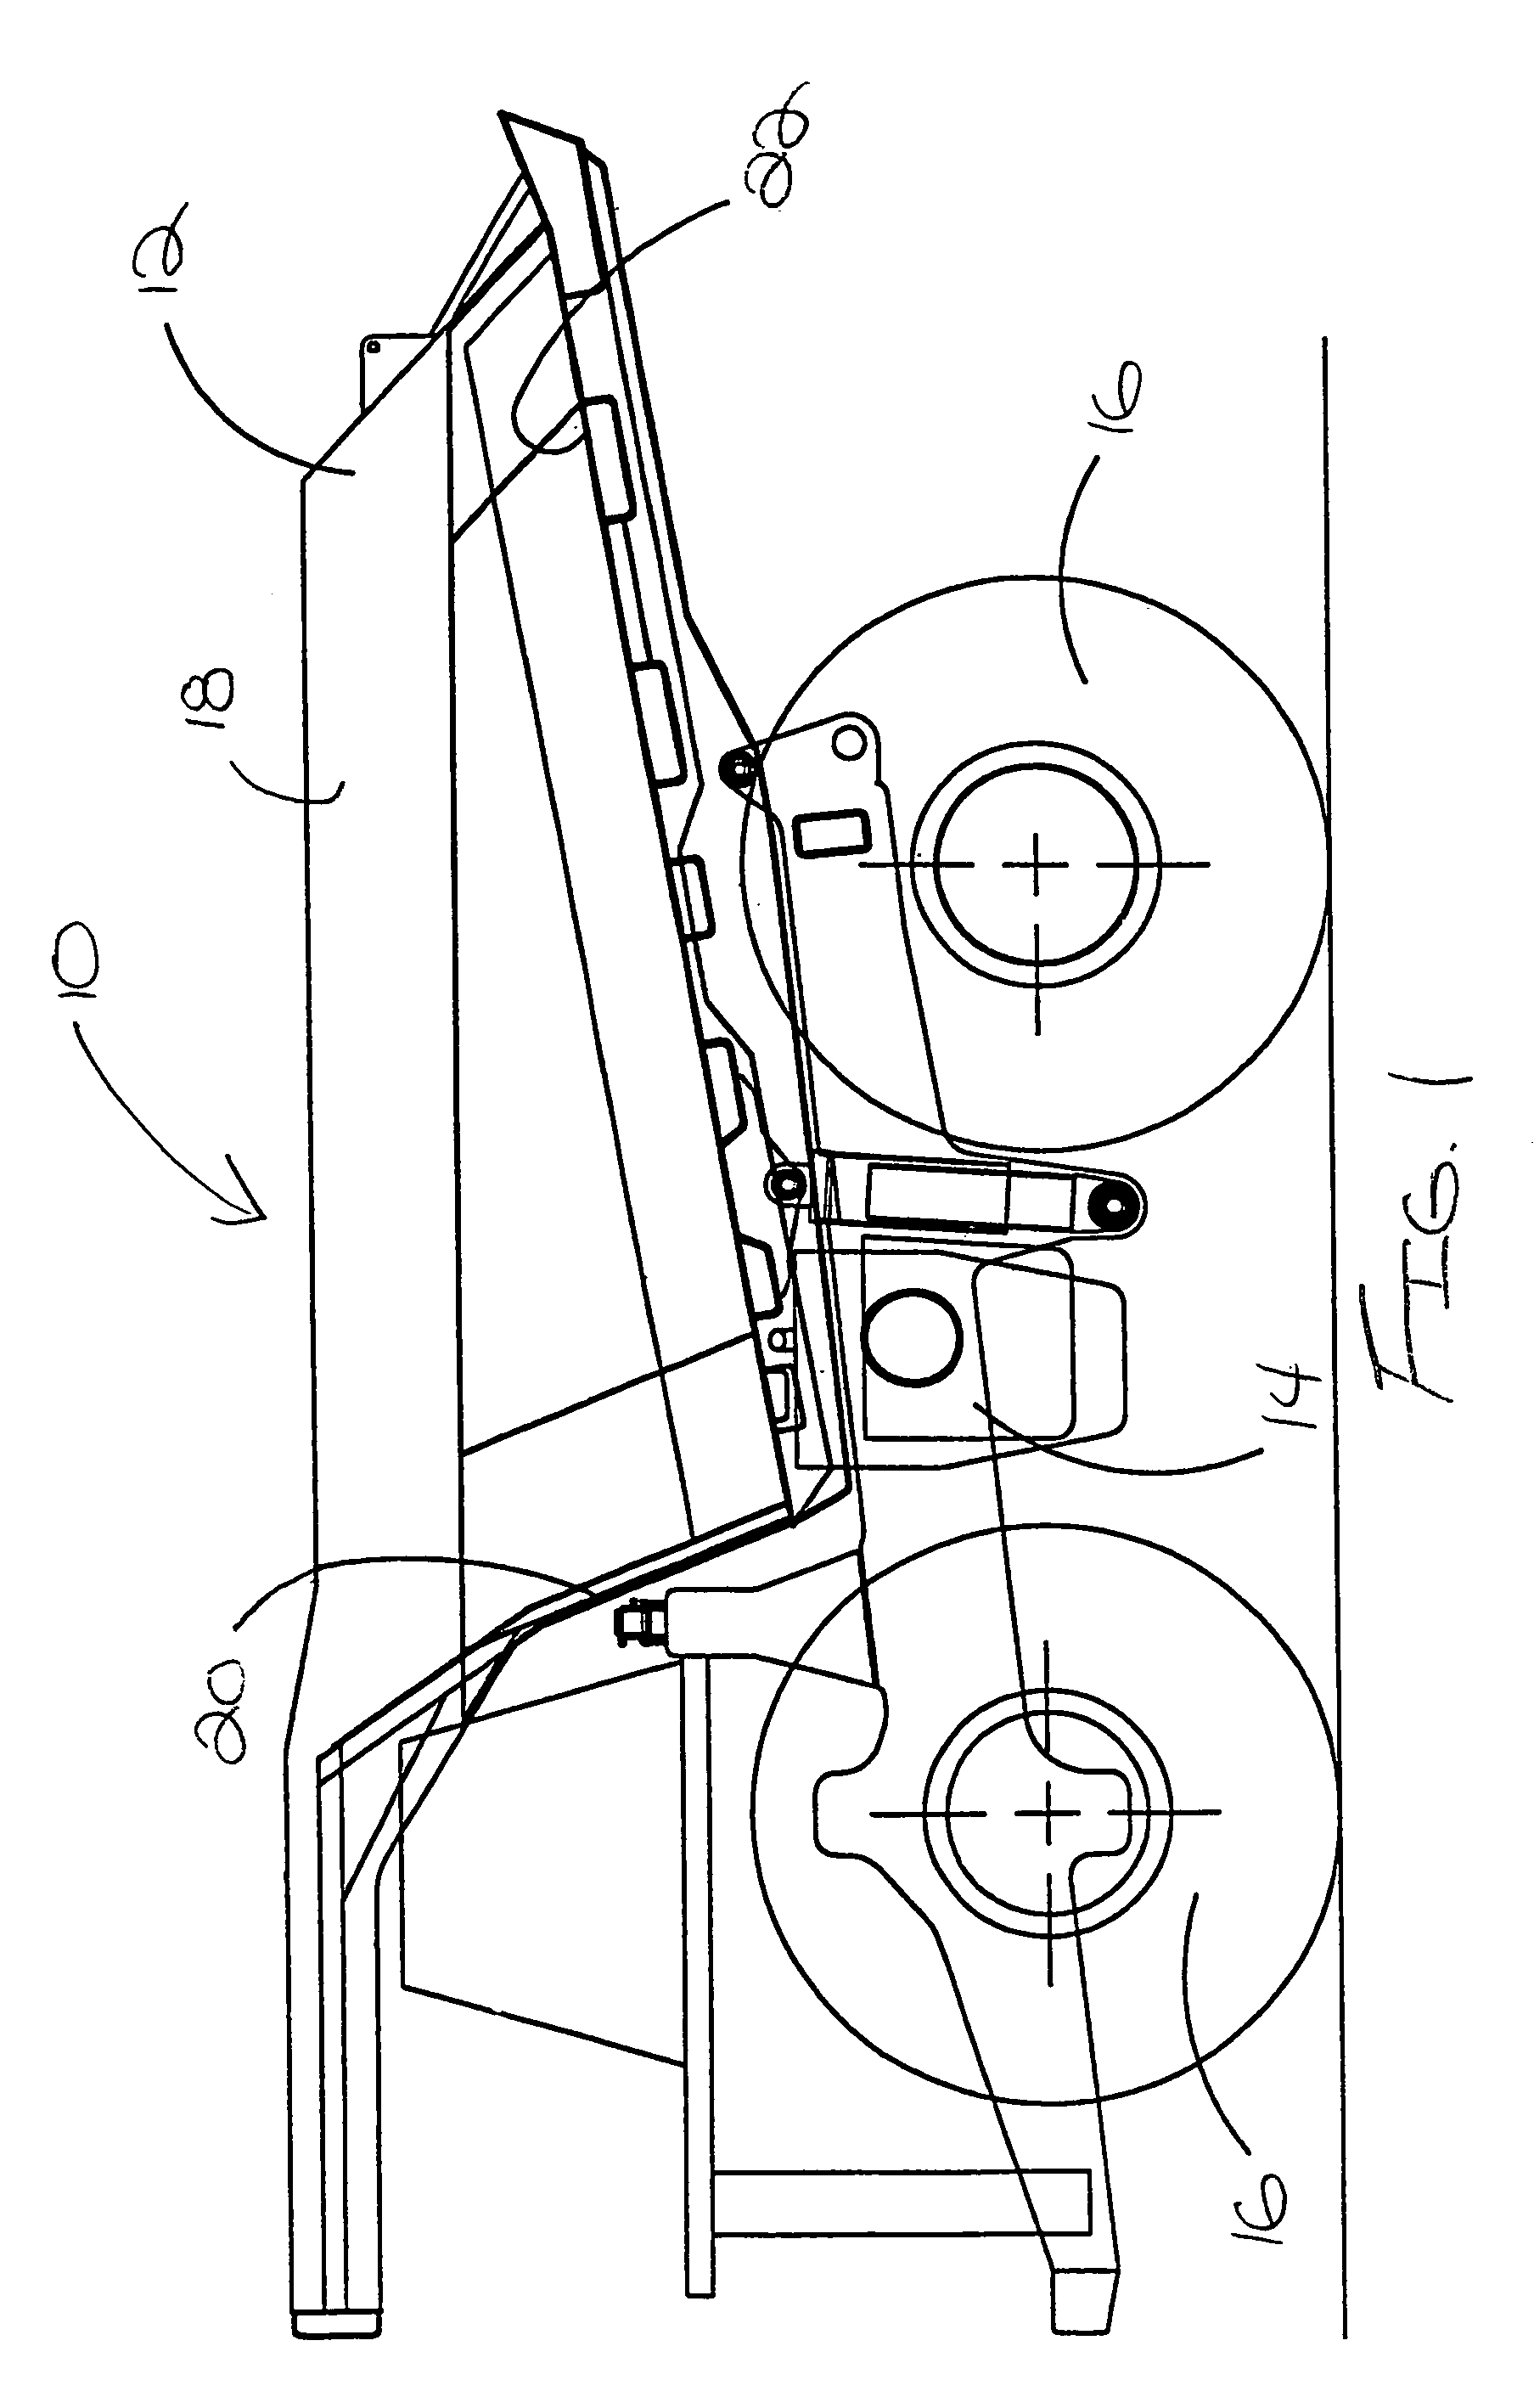 Method of estimating the volumetric carrying capacity of a truck body